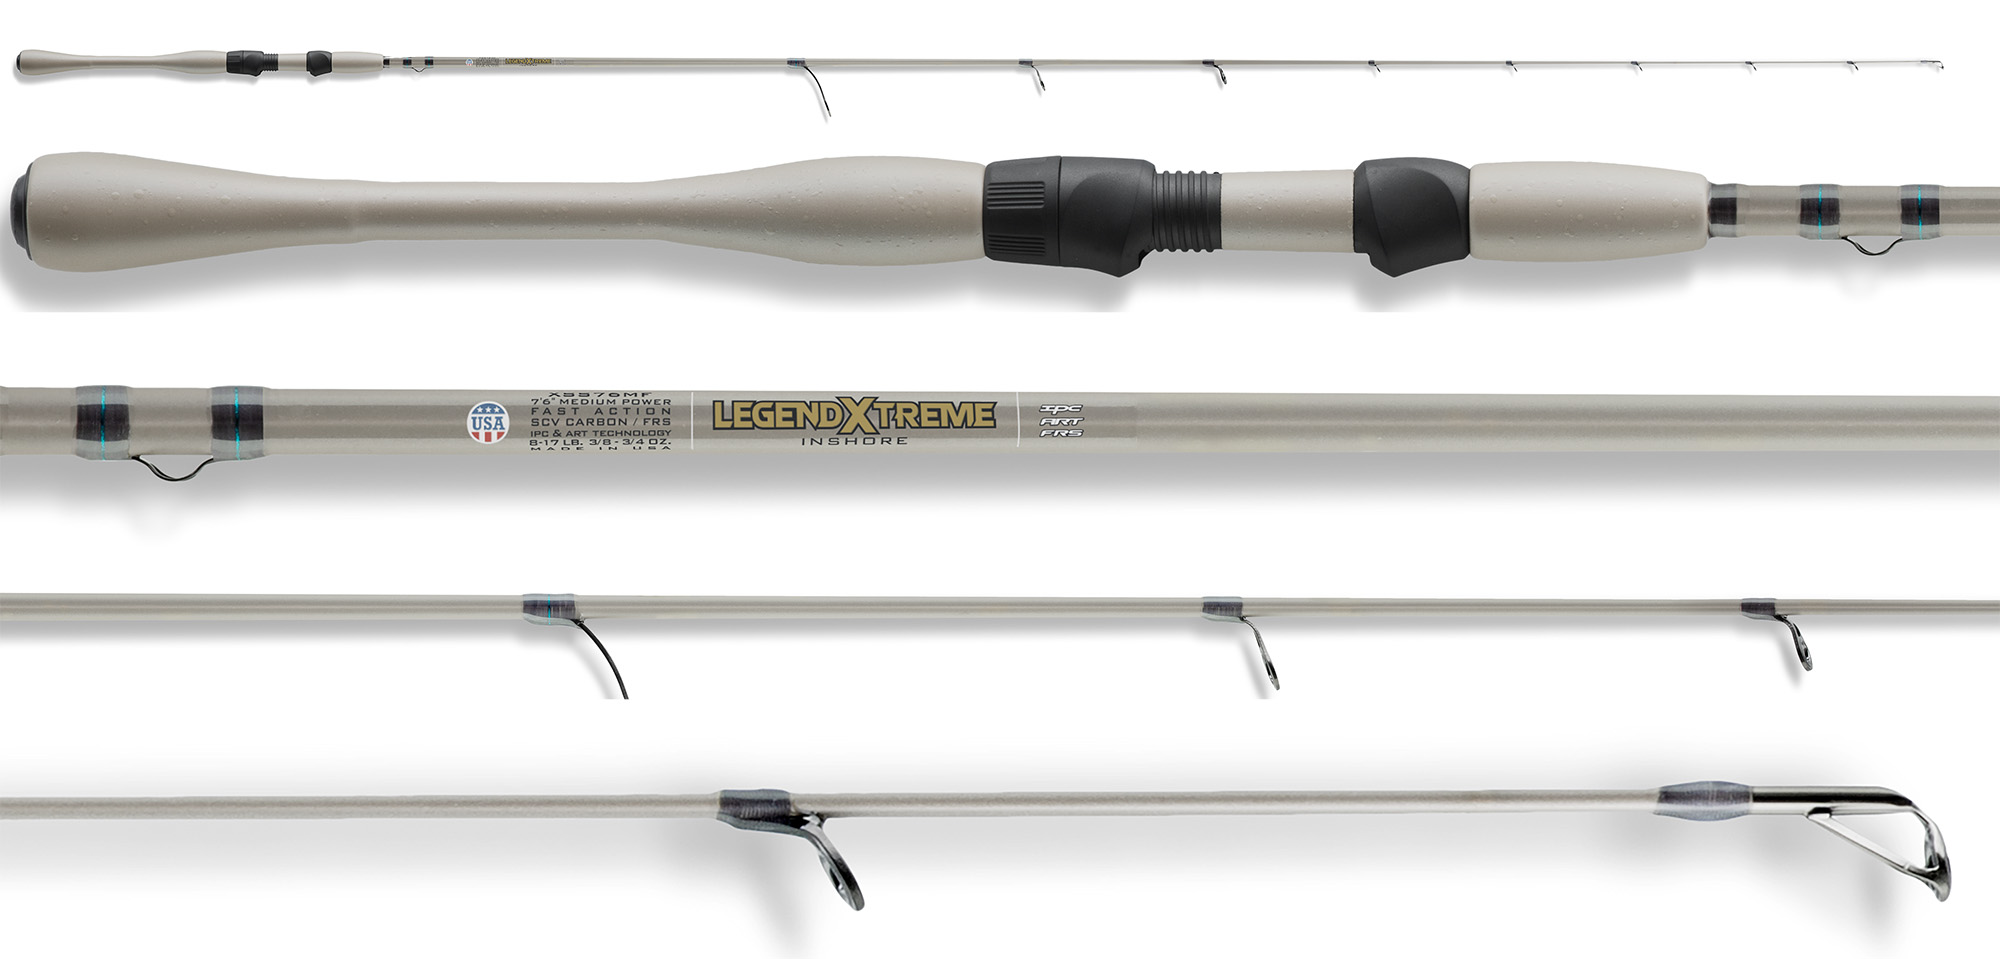 St. Croix Rods - Both the Triumph Travel four-piece rods and Avid Trek  thee-piece rods performed great and were a joy to fish with. These  handcrafted rods are very well made and